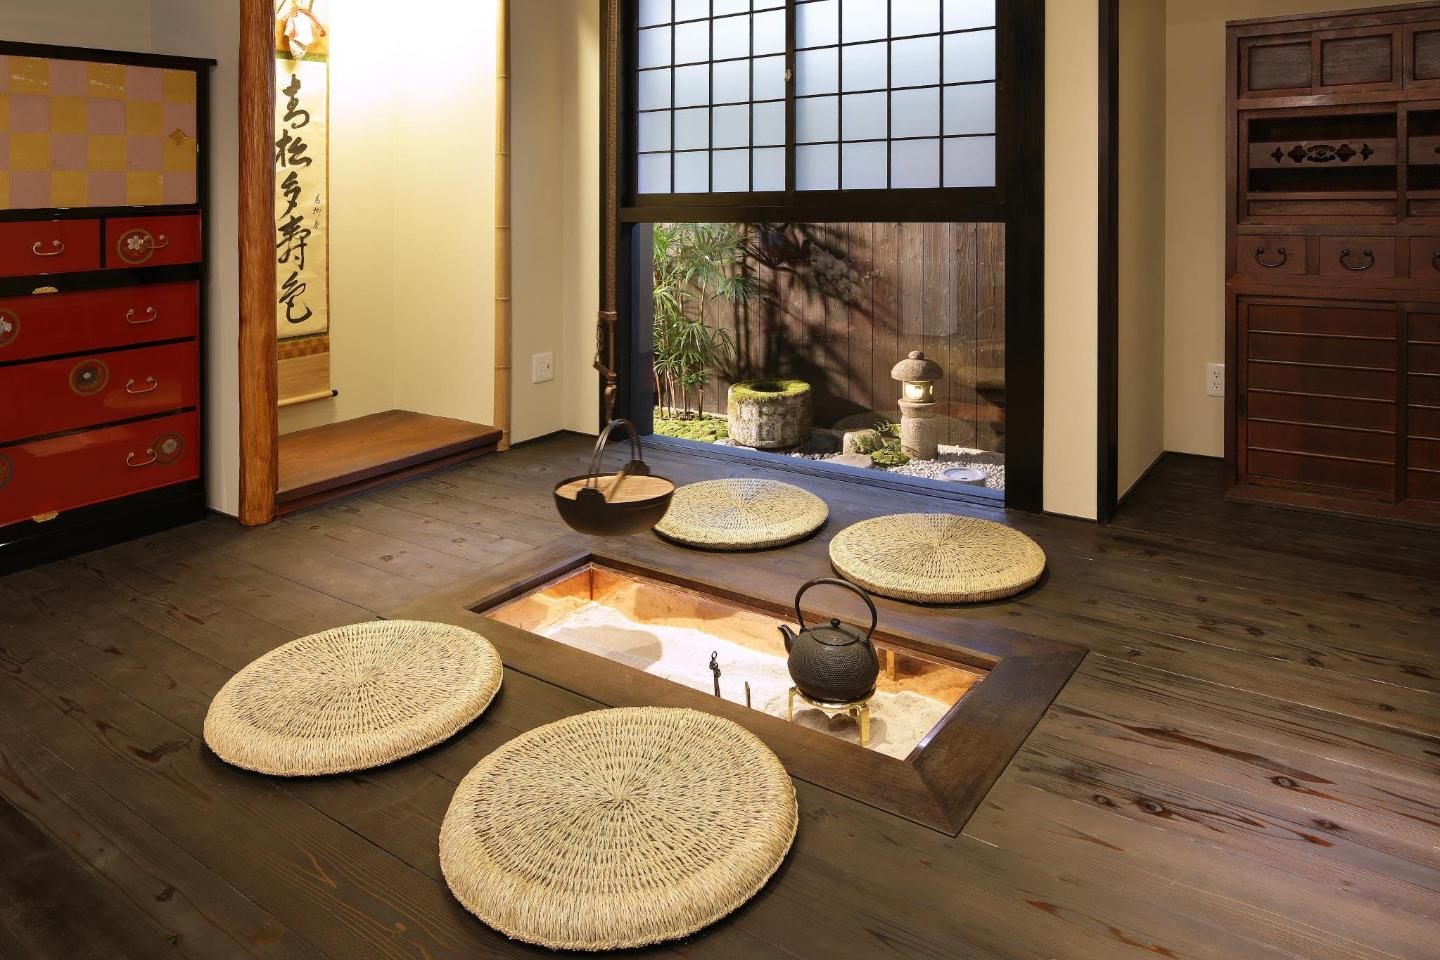 The 10 BEST Kyoto Ryokans hotels of 2023